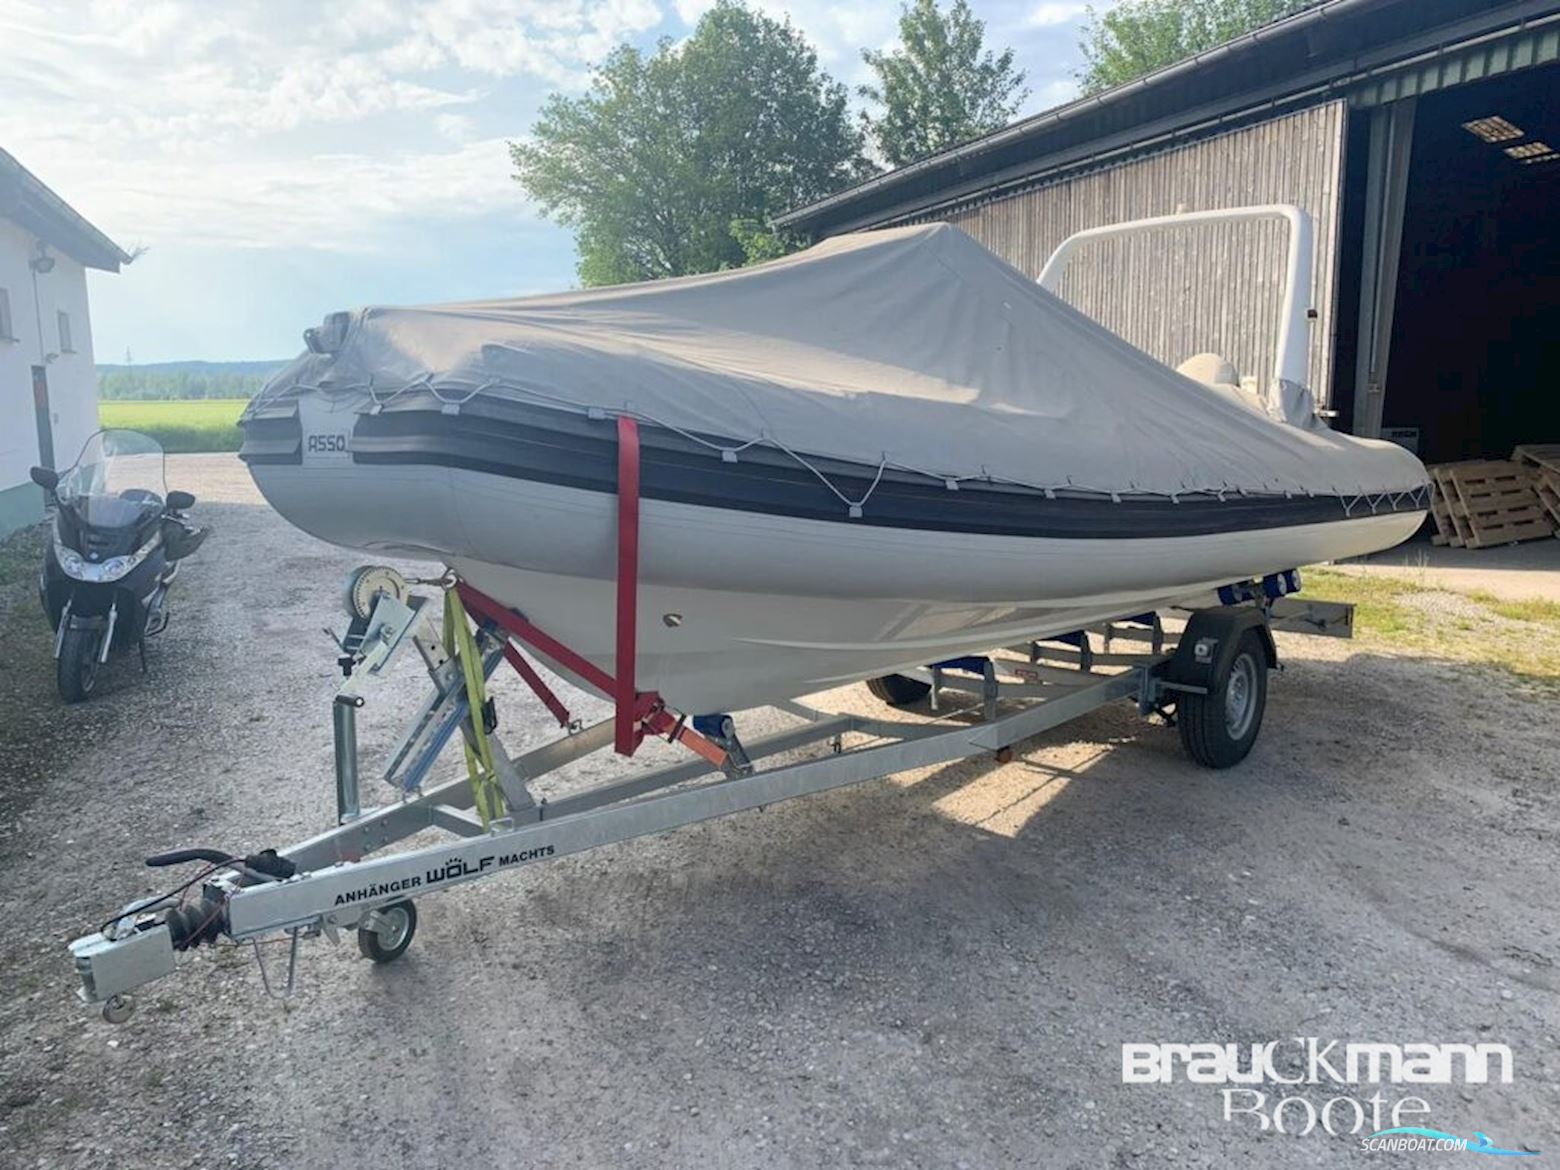 Zar Asso Rib Inflatable / Rib 2010, with Evinrude Outboard Motors engine, Germany